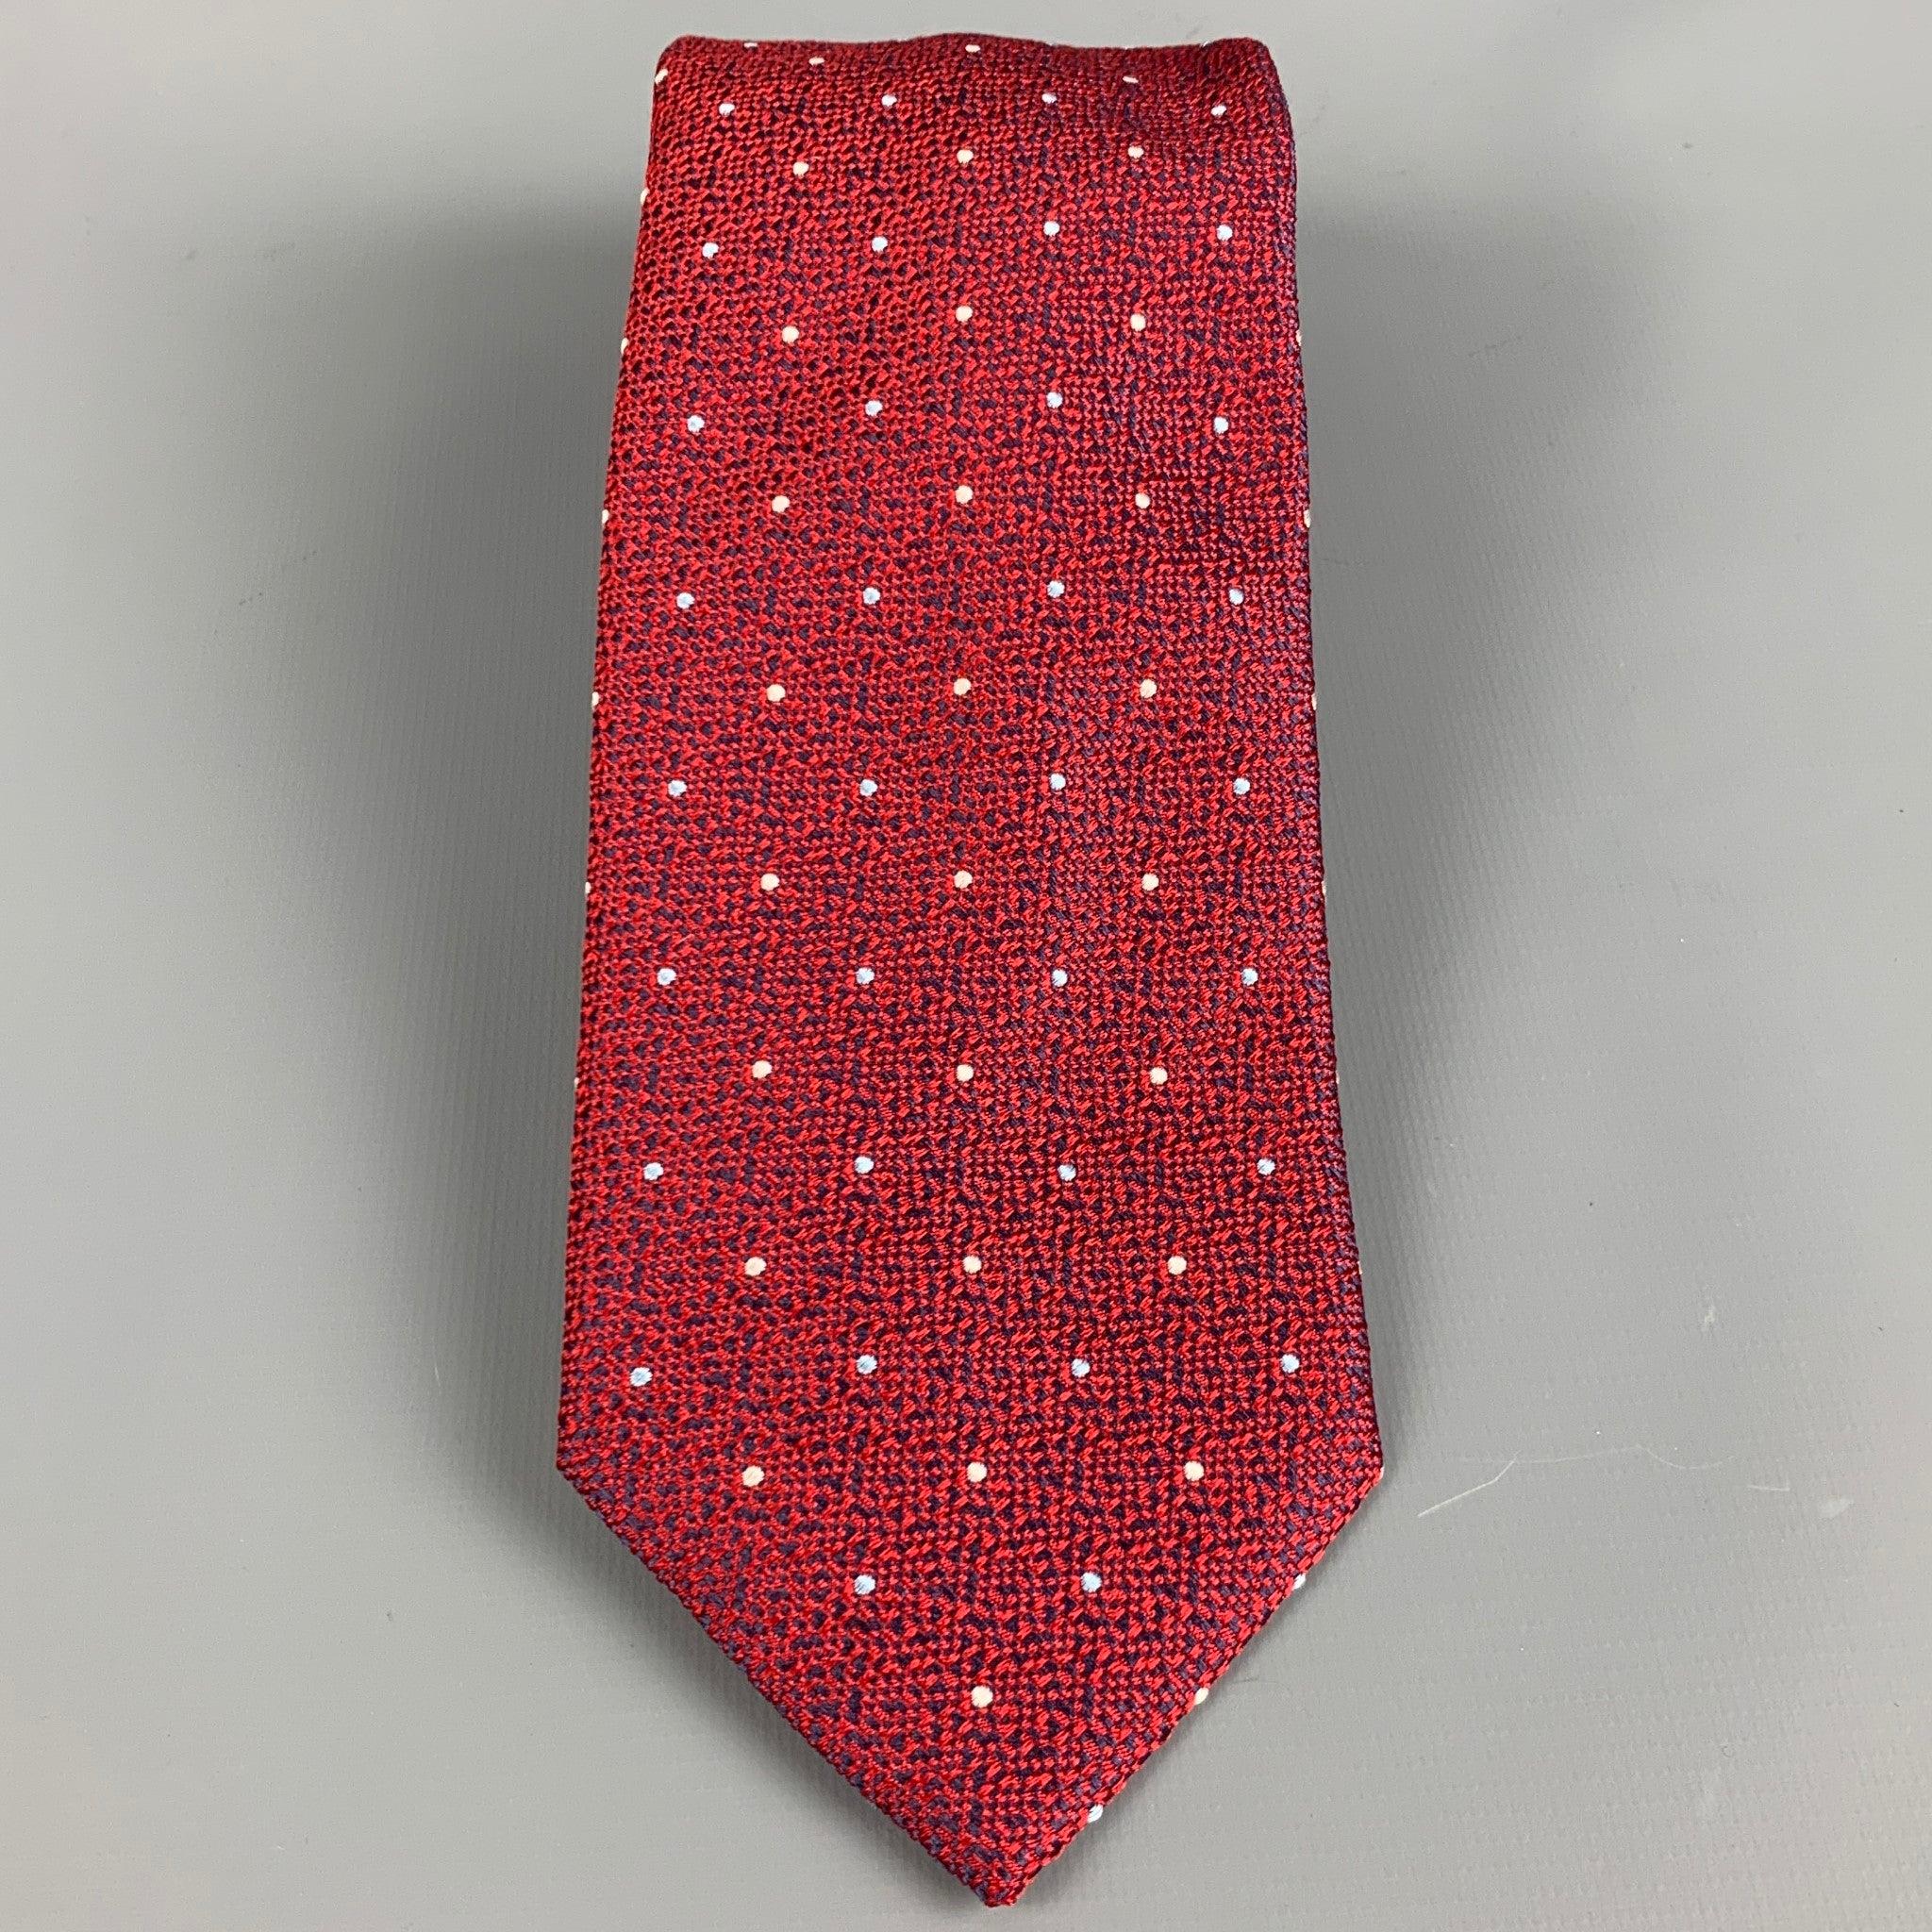 BRIONI
necktie in a red and navy silk fabric featuring white dots pattern. Handmade in Italy.Excellent Pre-Owned Condition. 

Measurements: 
  Width: 3 inches Length: 60 inches 
  
  
 
Reference: 127308
Category: Tie
More Details
    
Brand: 